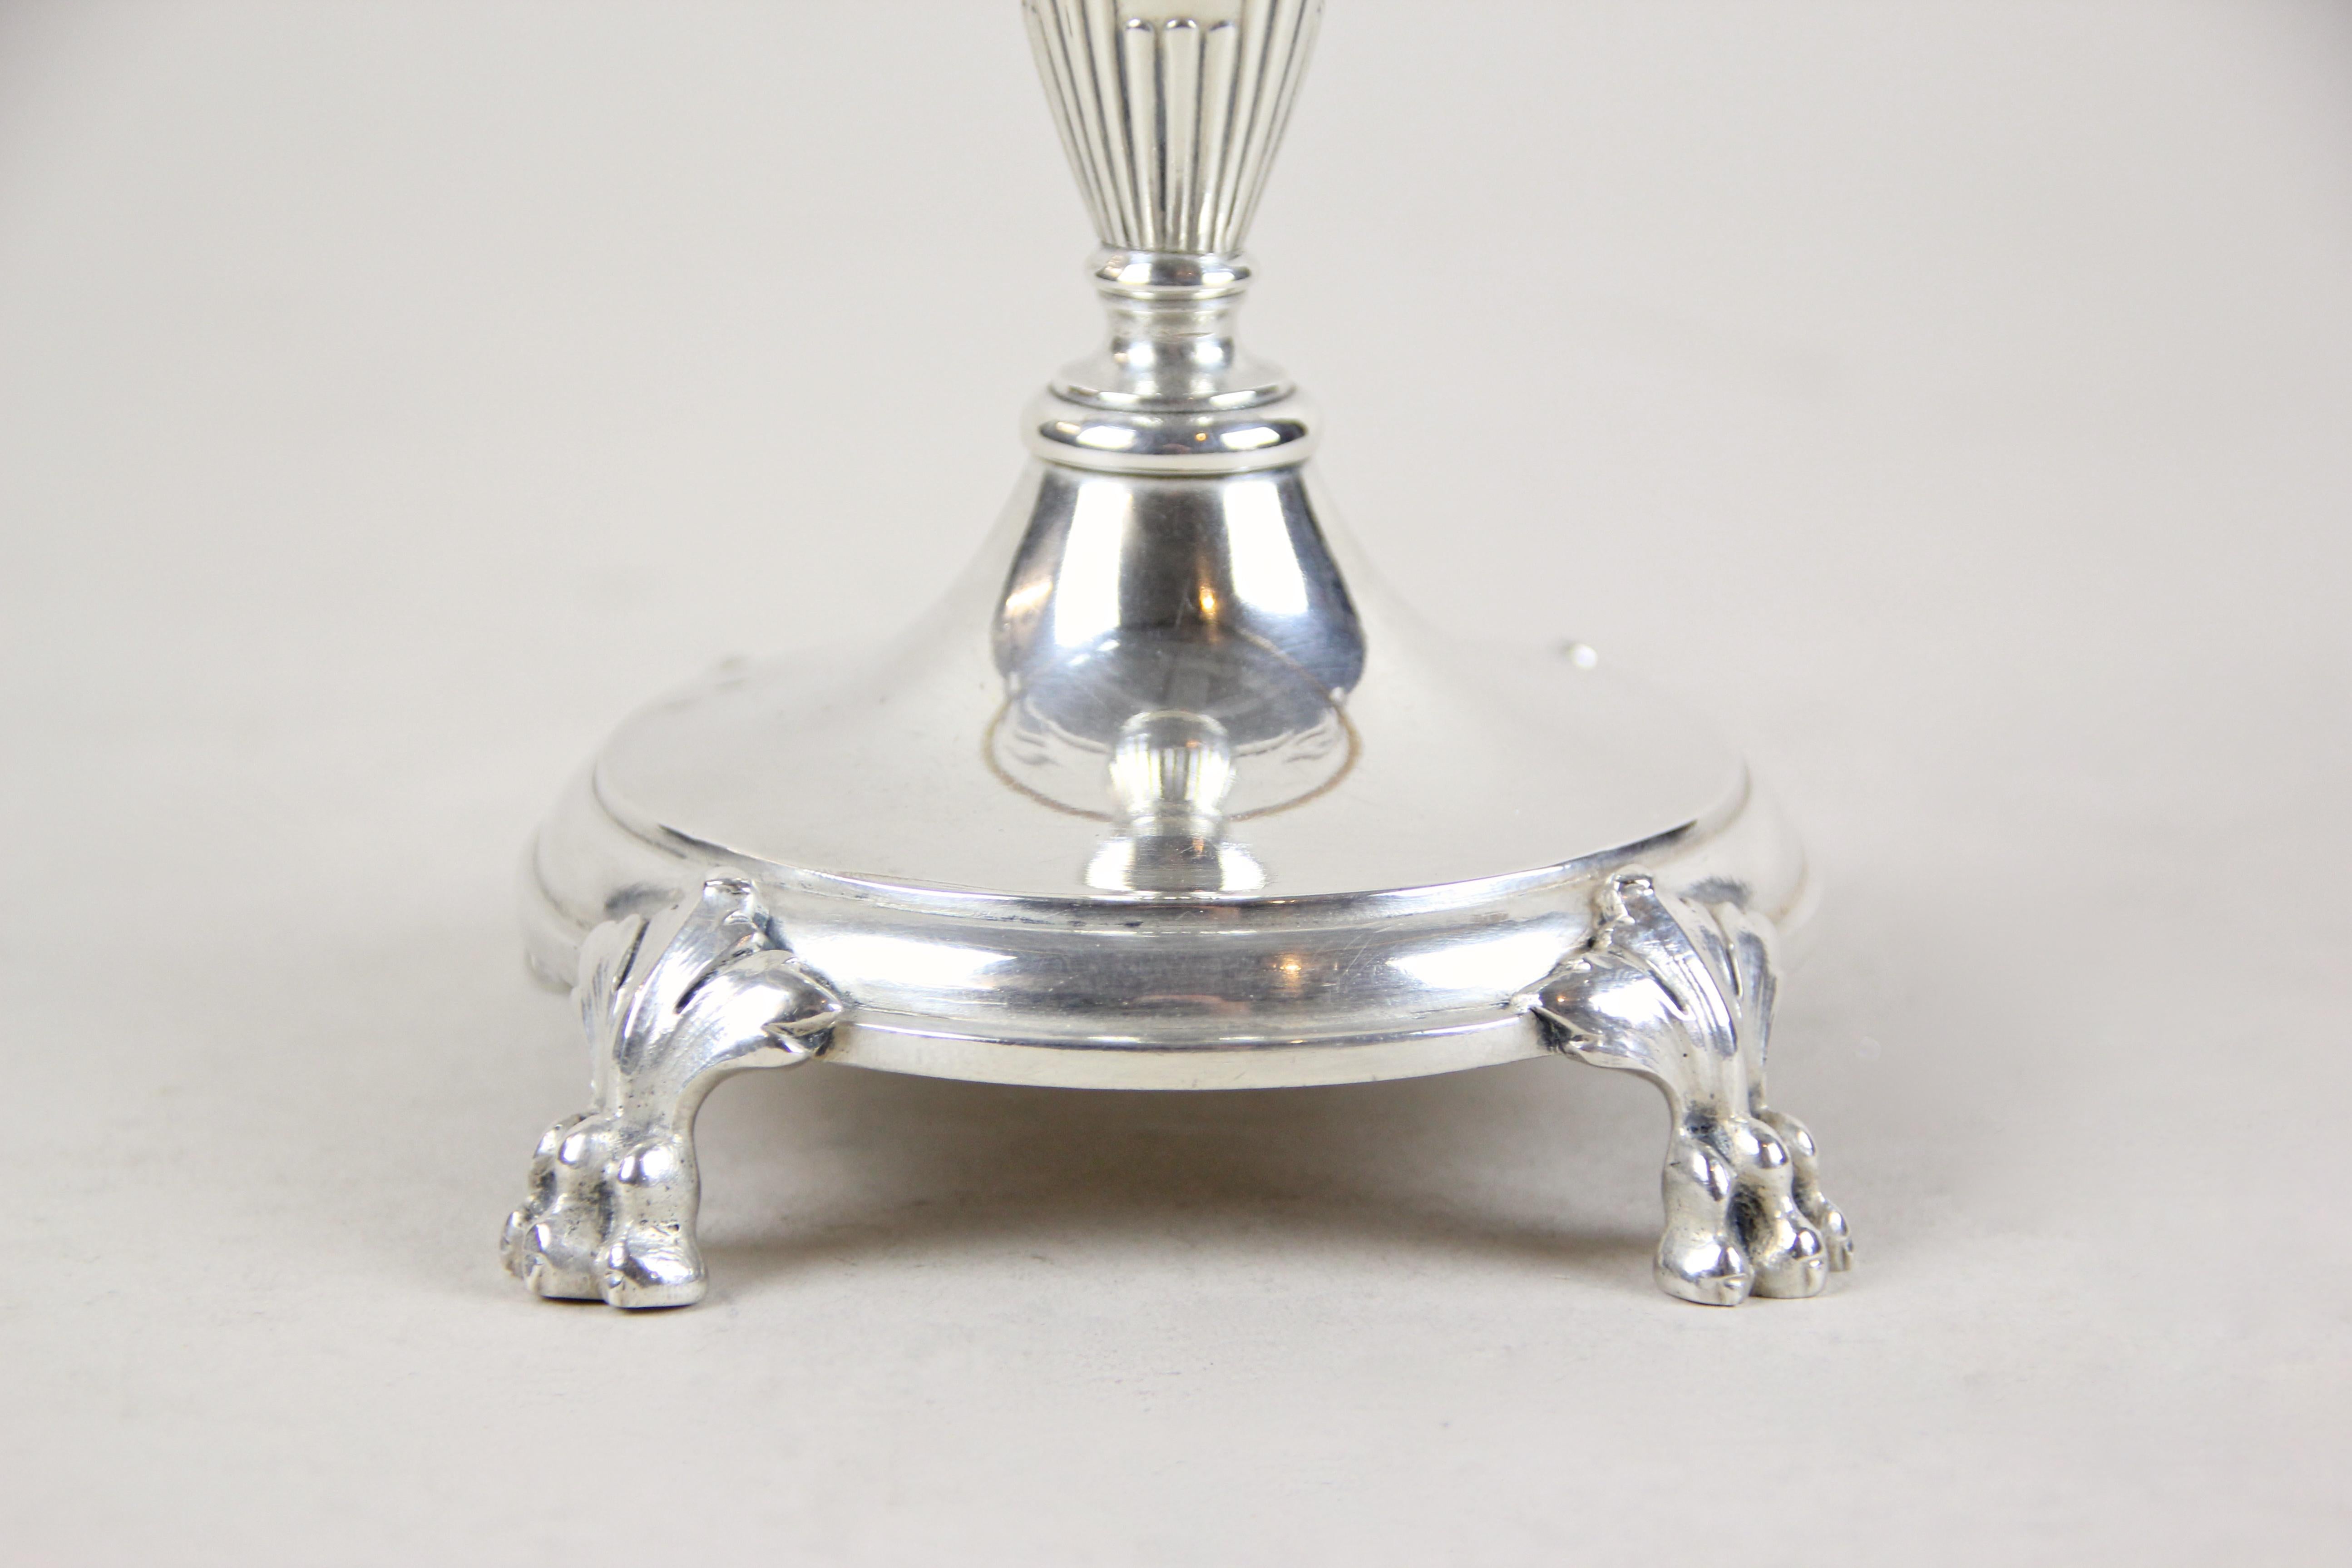 Gorgeous silvered centerpiece by Berndorf with a beautiful gilt Moser Glassworks Plate on top. This masterpiece was processed in the Art Nouveau period in Austria circa 1910 and is adorned by an original Moser Glassworks plate adorned by a beautiful